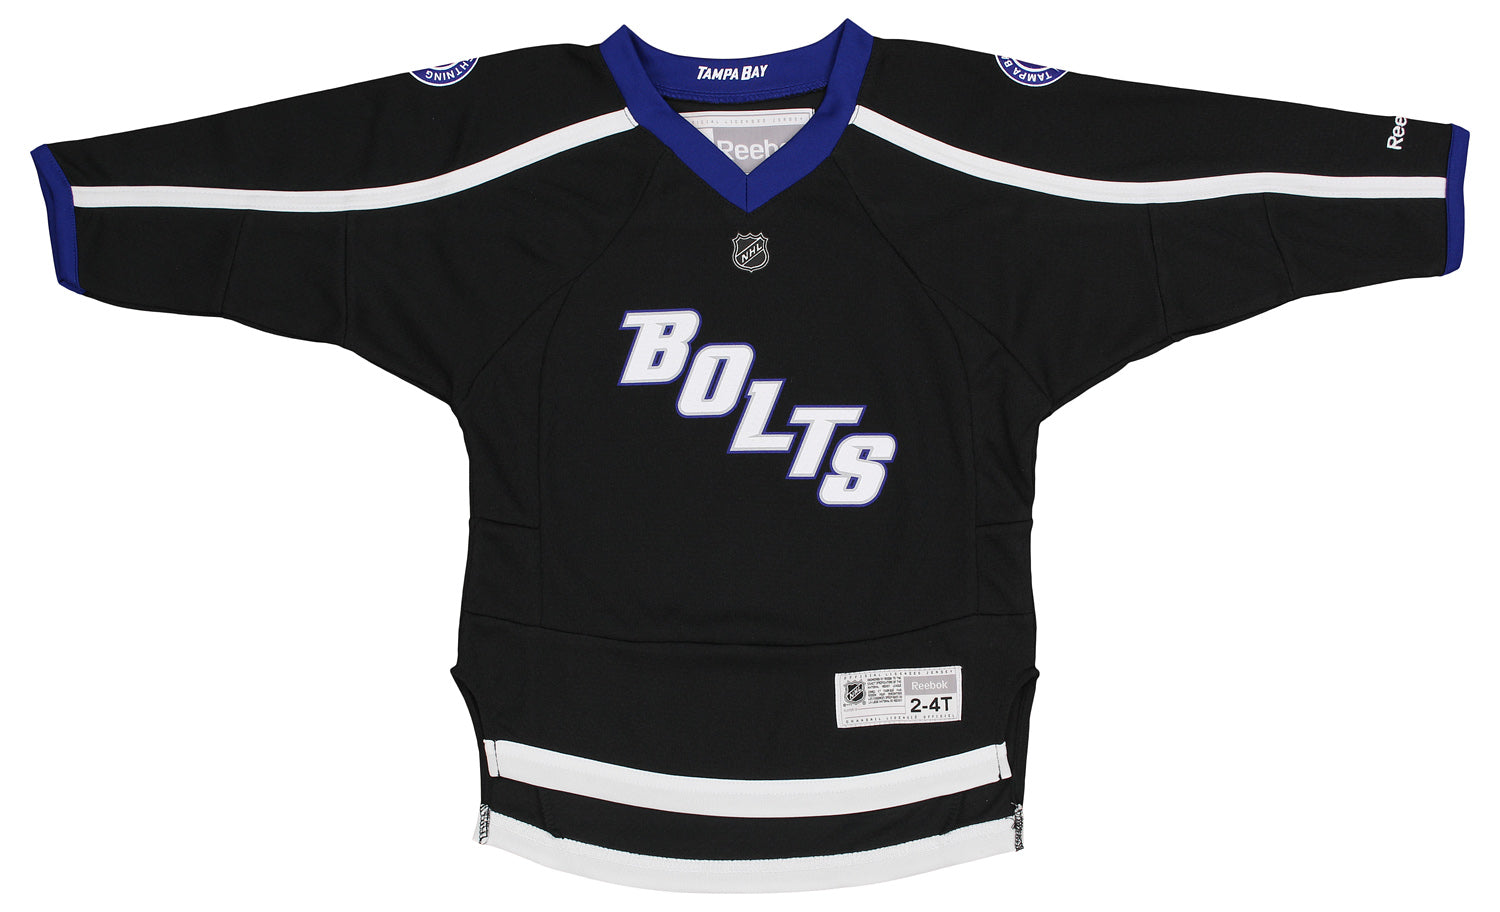  Outerstuff Tampa Bay Lightning Youth Size Hockey Team